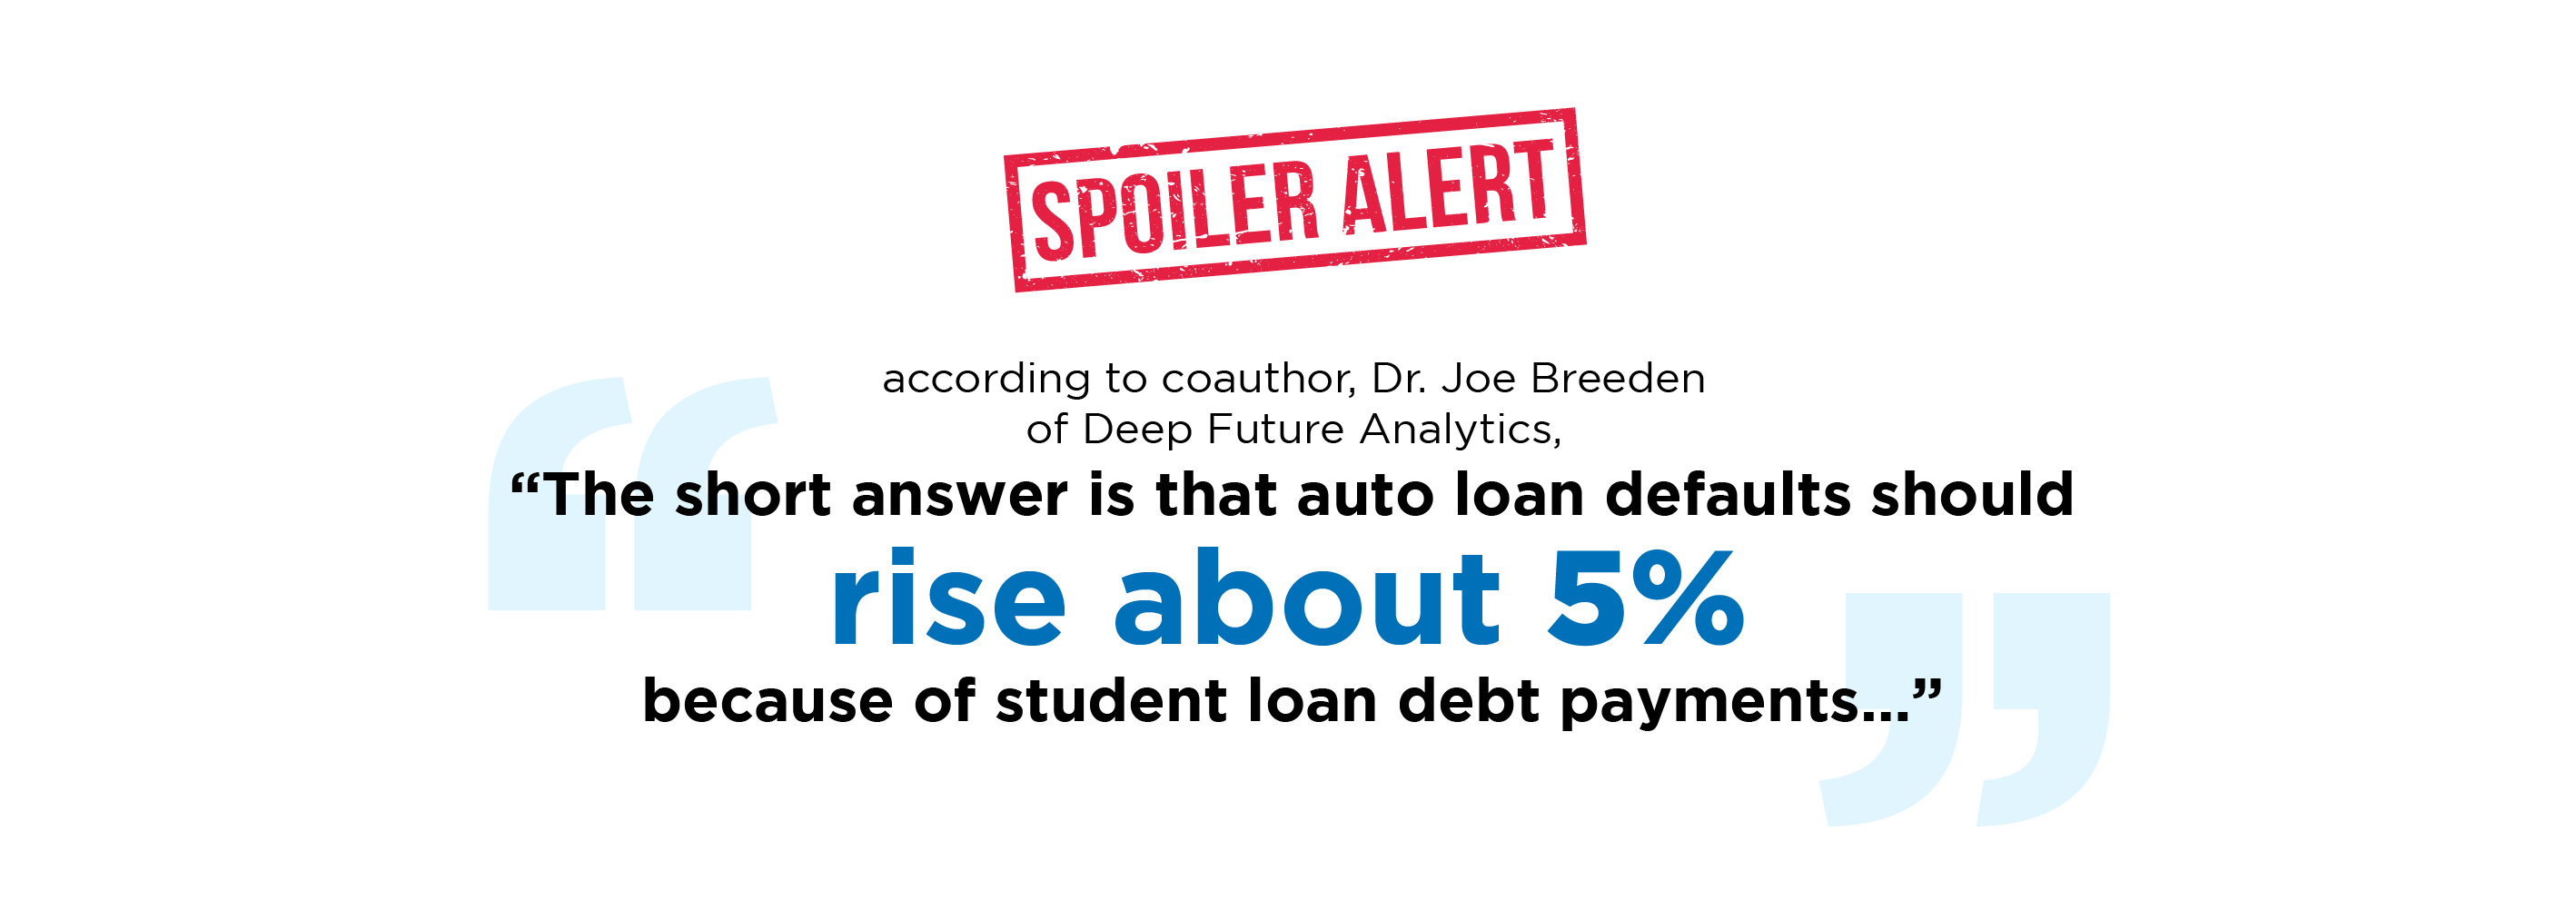 Auto loan defaults expected to rise about 5% because of student loan debt payments.